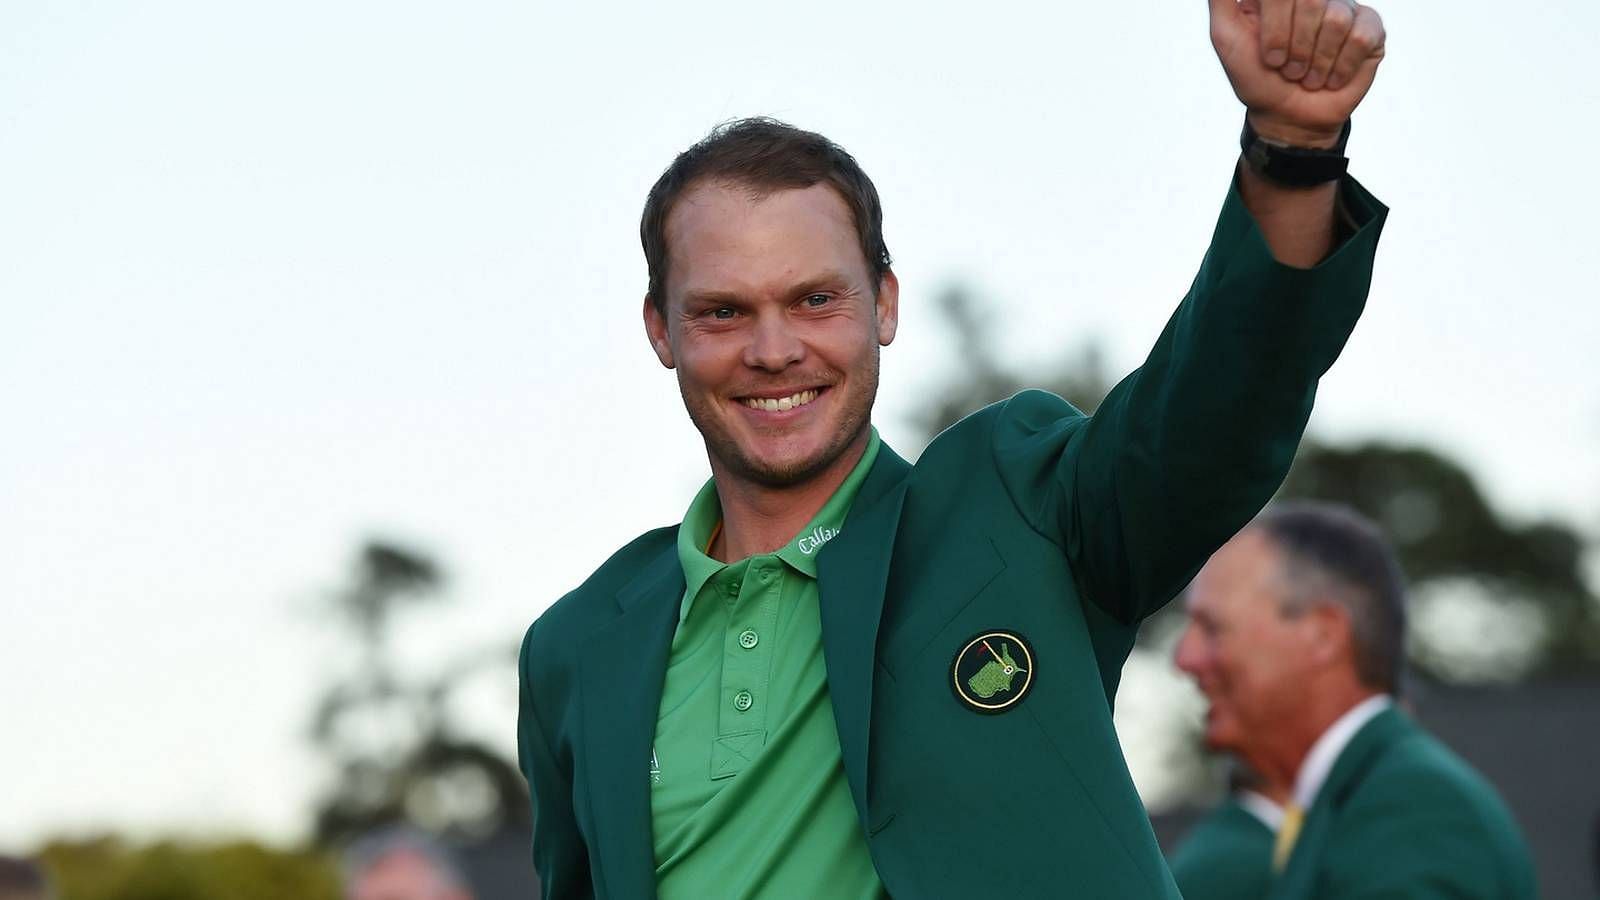 Danny Willett at the 2016 US Masters (Image via The Irish Time / AFP)